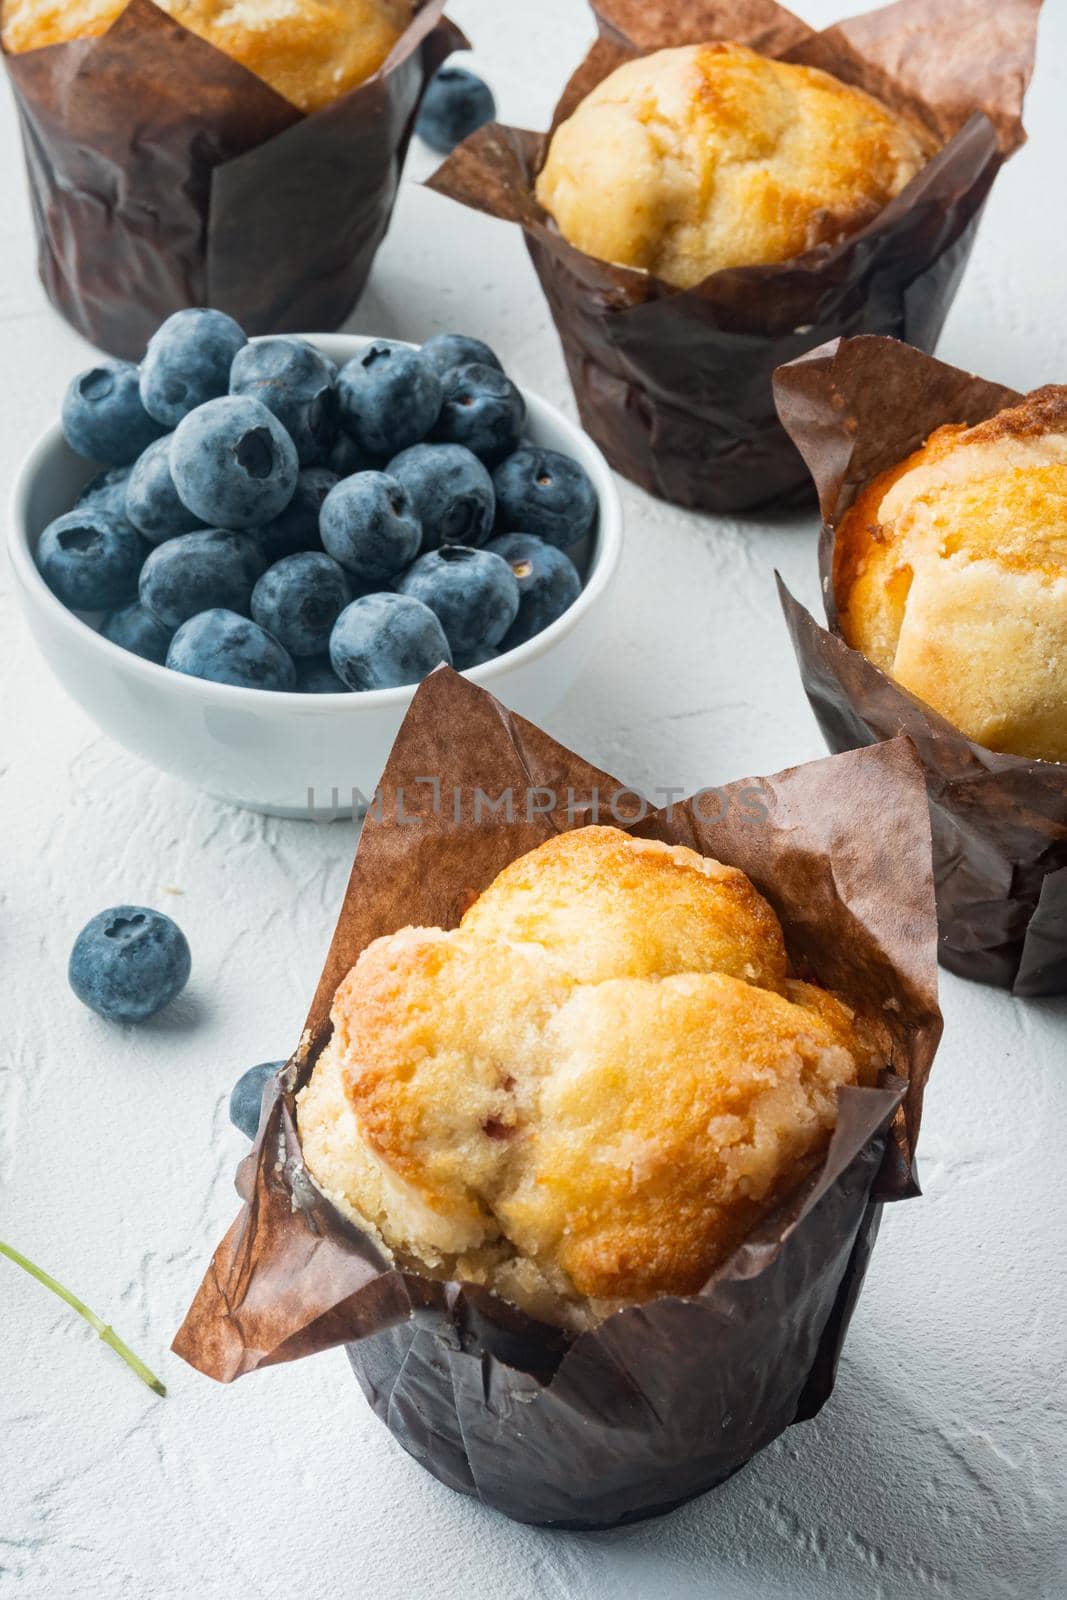 Muffins with blueberries, on white background